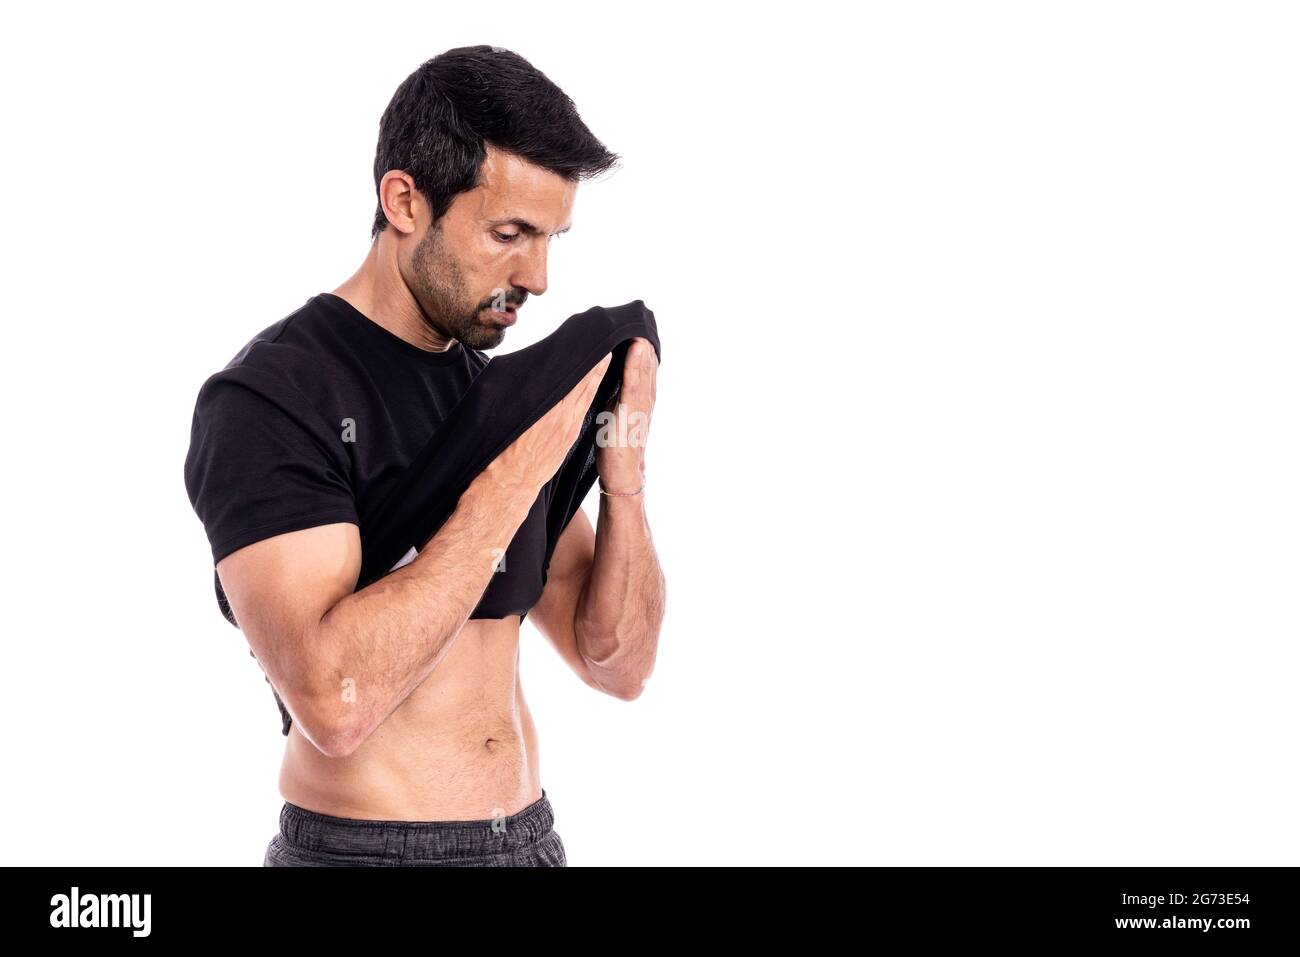 European man, caucasian, an athlete, wipes sweat from his forehead with a T-shirt. After a hard workout. Stress and fatigue. On a white background. Stock Photo